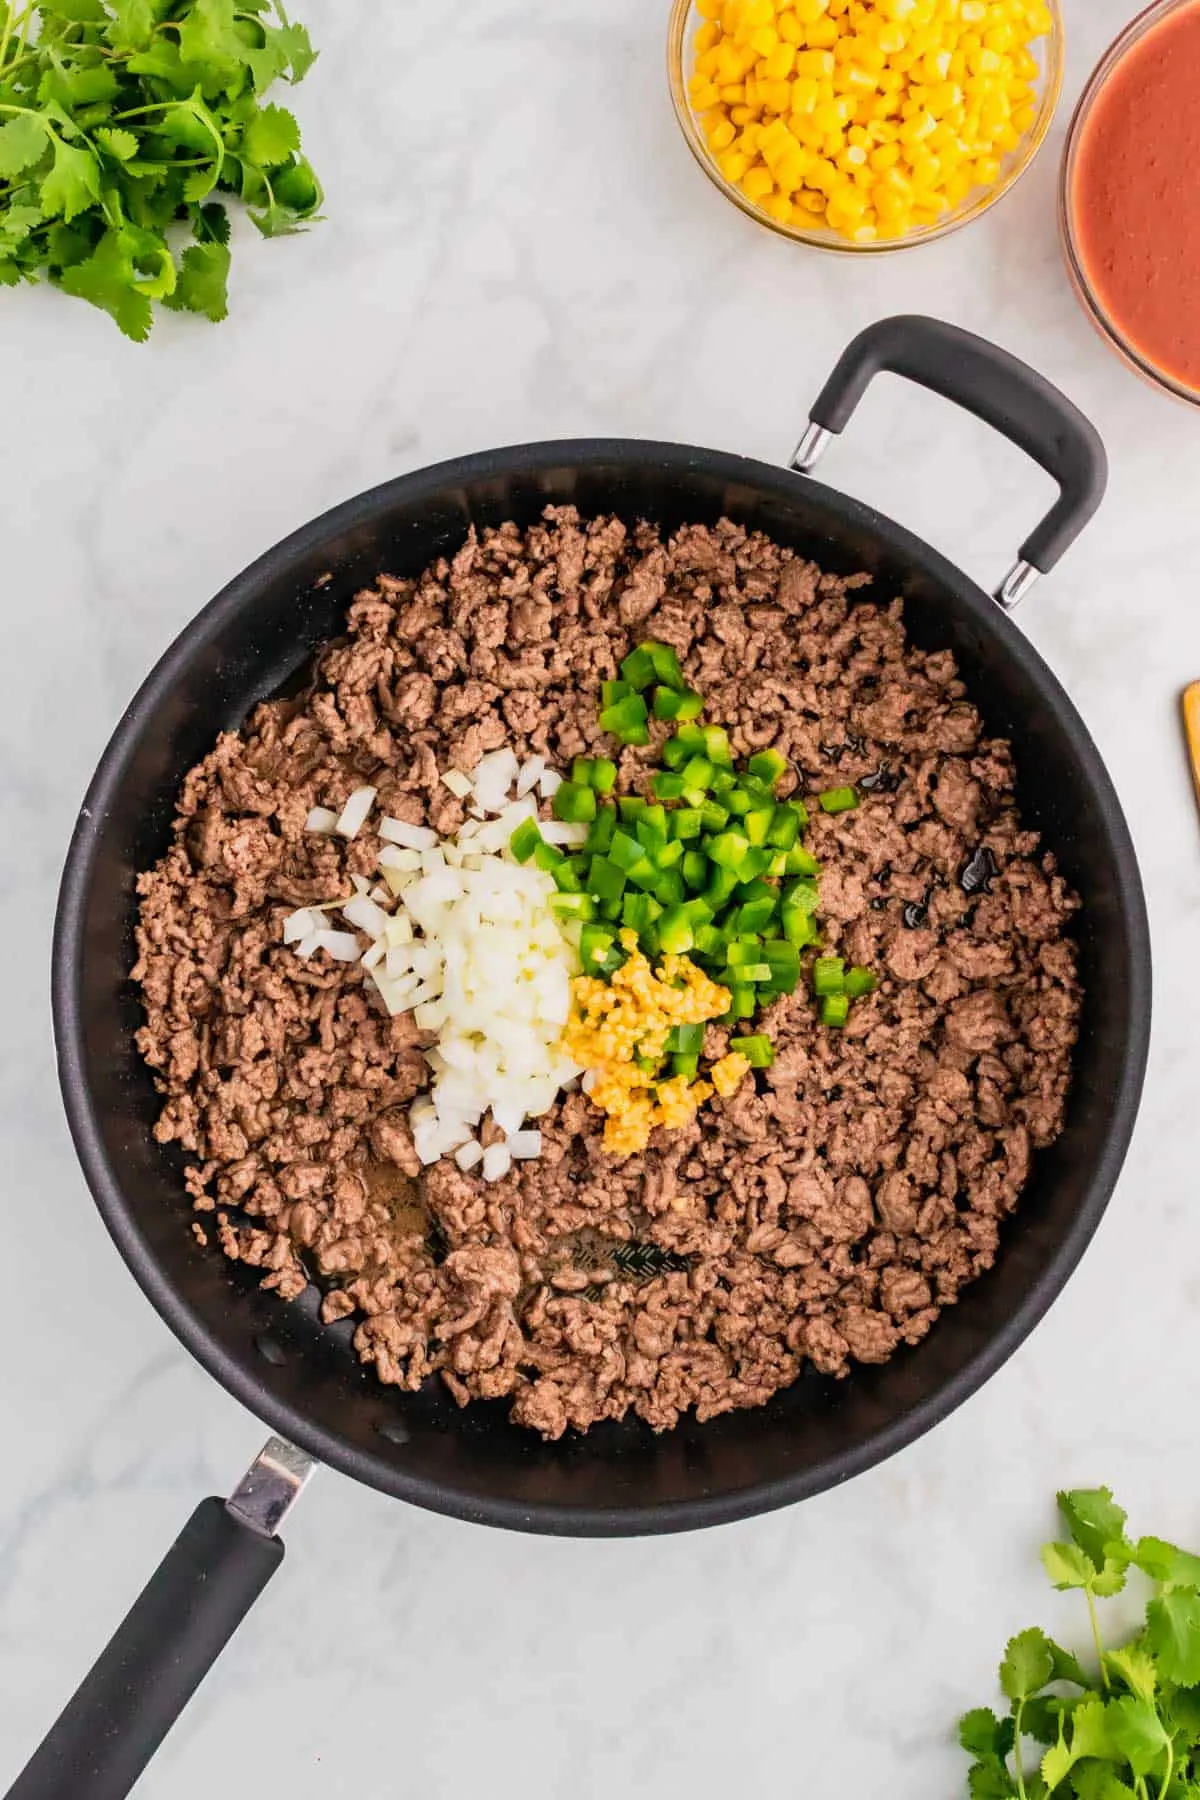 diced onions, diced green peppers and minced garlic on top of cooked ground beef in a skillet